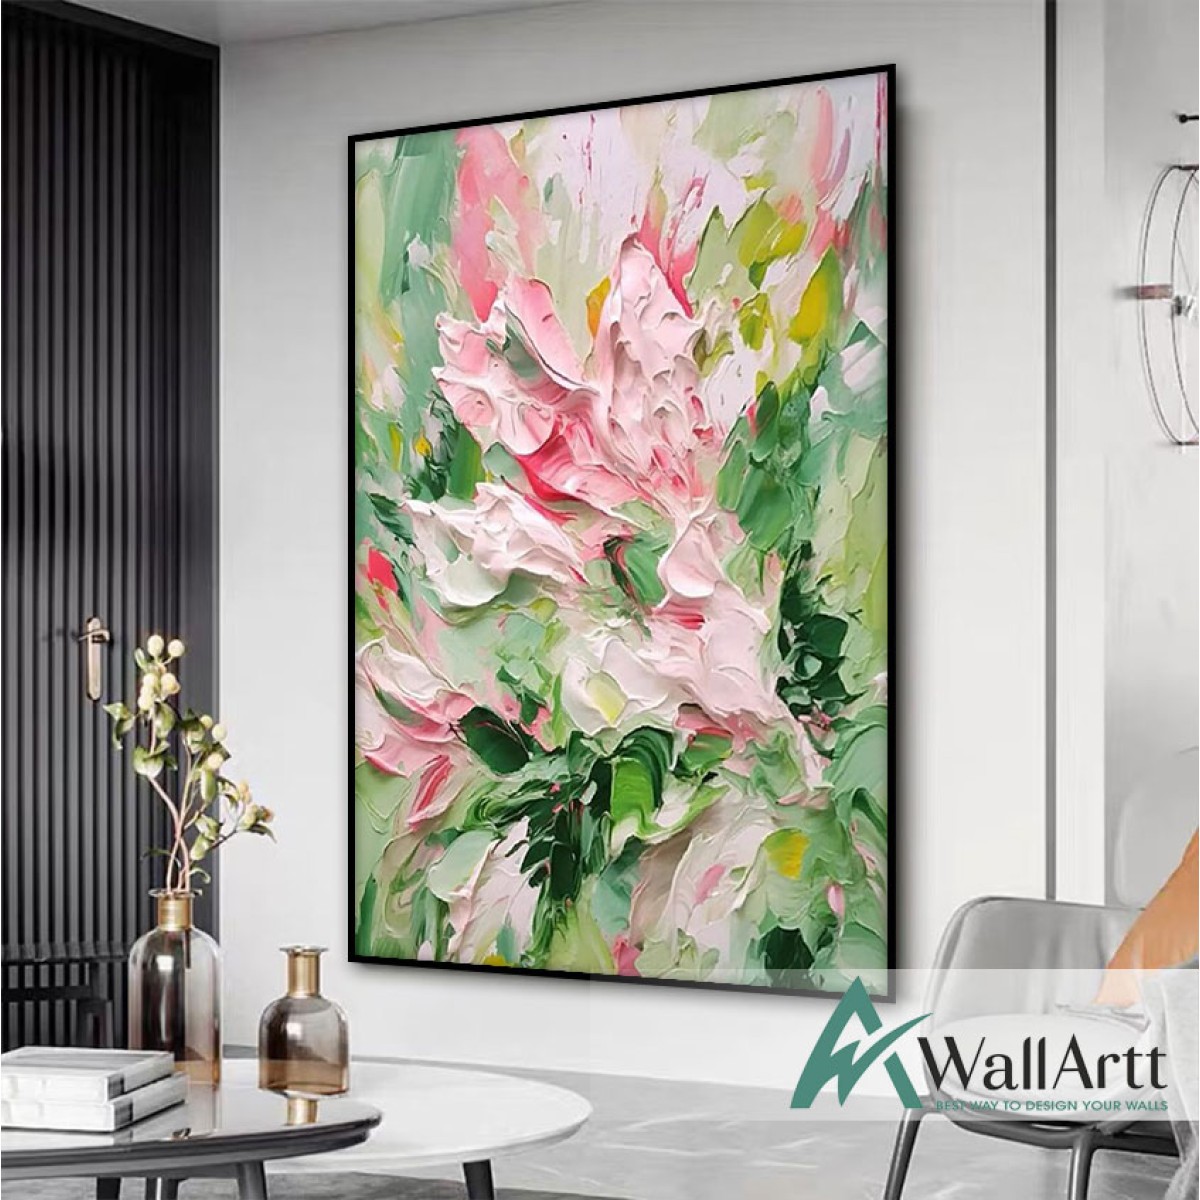 Cream White Flower with Gold 3d Heavy Textured Partial Oil Painting